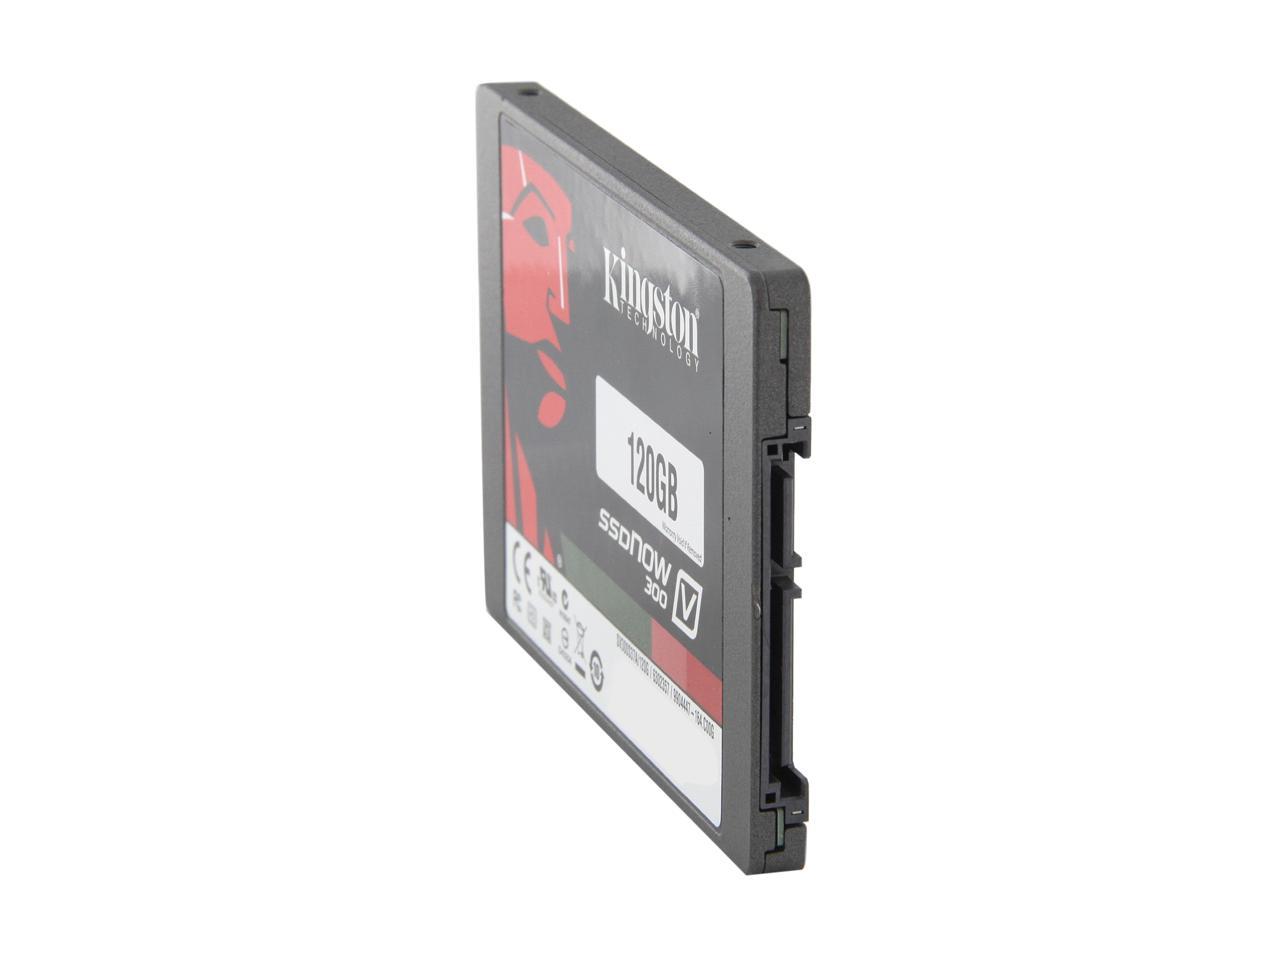 SV300S37A/120G New V300 SSD For Kingston 120GB 2.5" Internal Solid State Drive 